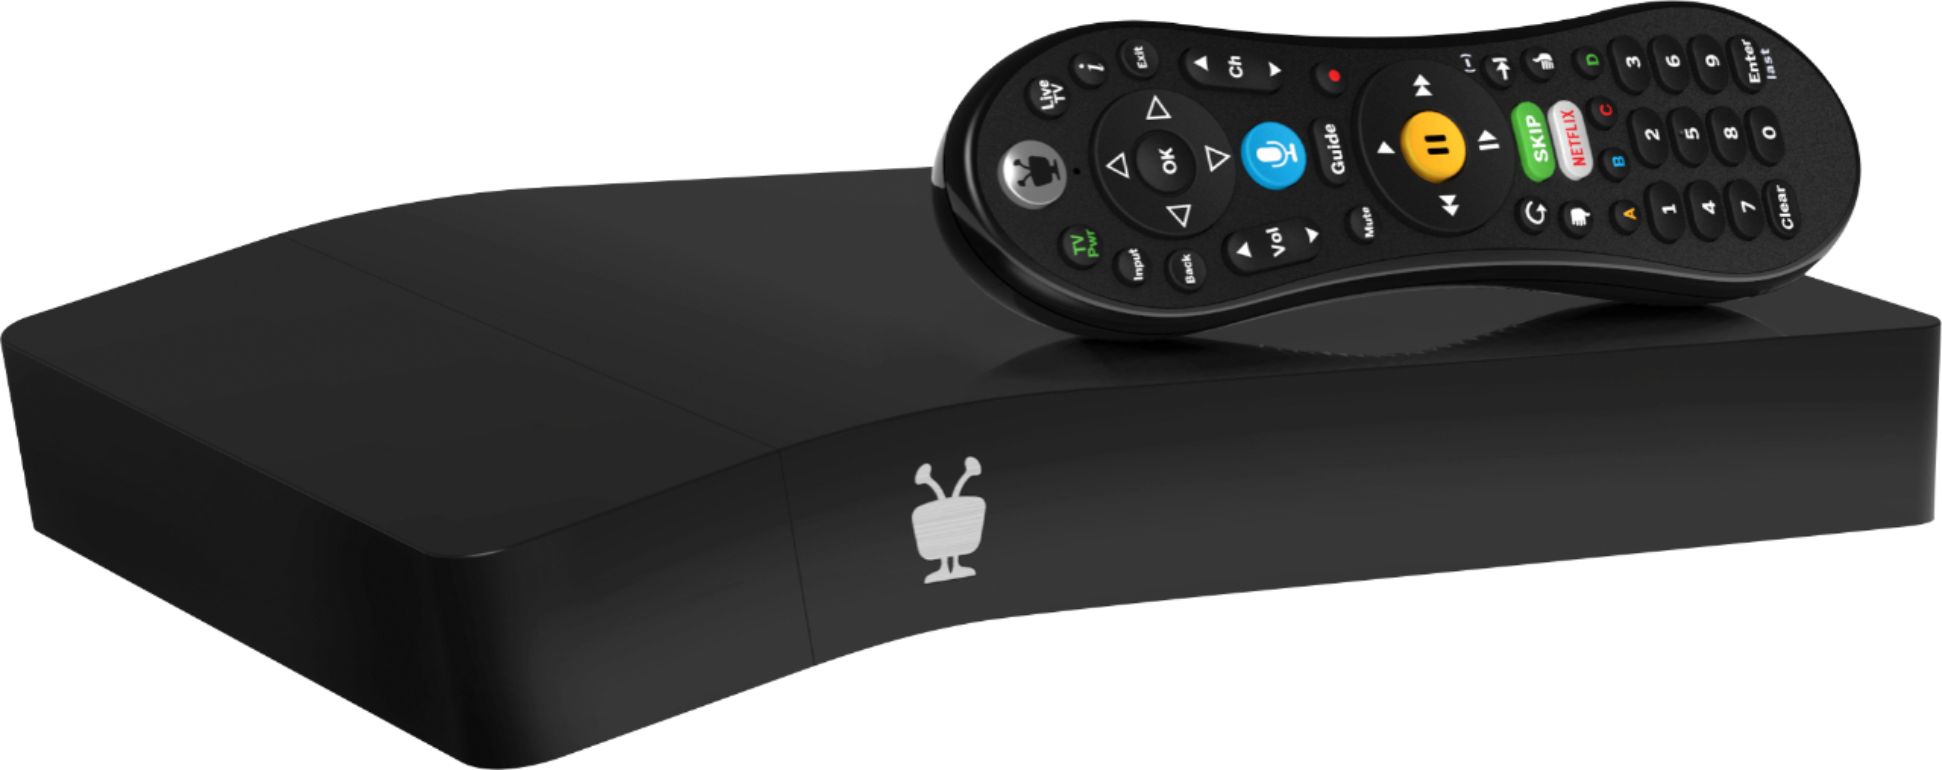 Questions and Answers: TiVo BOLT OTA 1TB DVR & Streaming Player Black ...